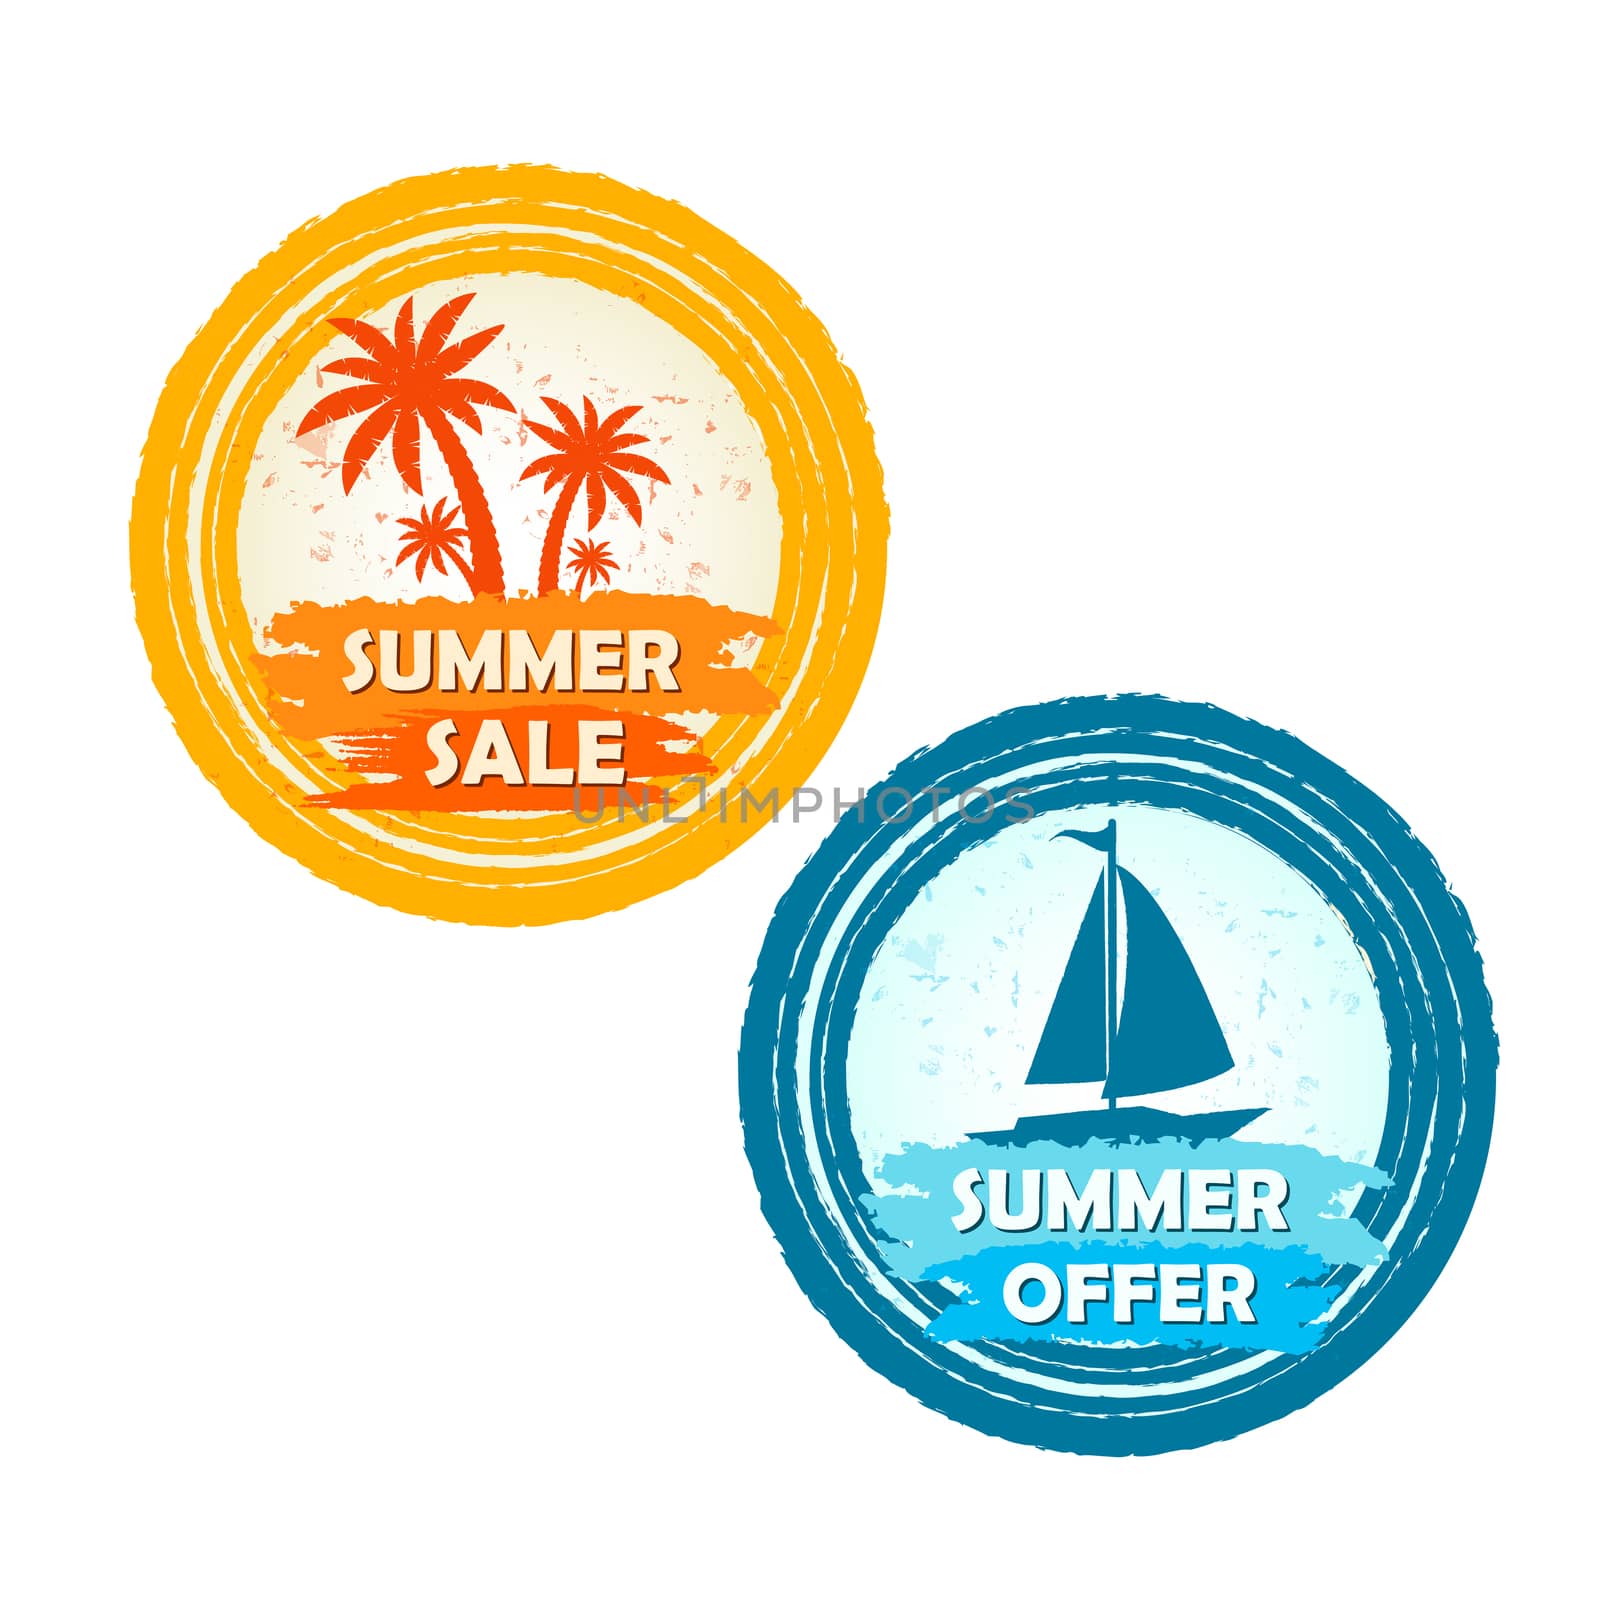 summer sale and offer banners with palms and boat signs - text in yellow orange and blue drawn circle labels with symbols, business seasonal shopping concept